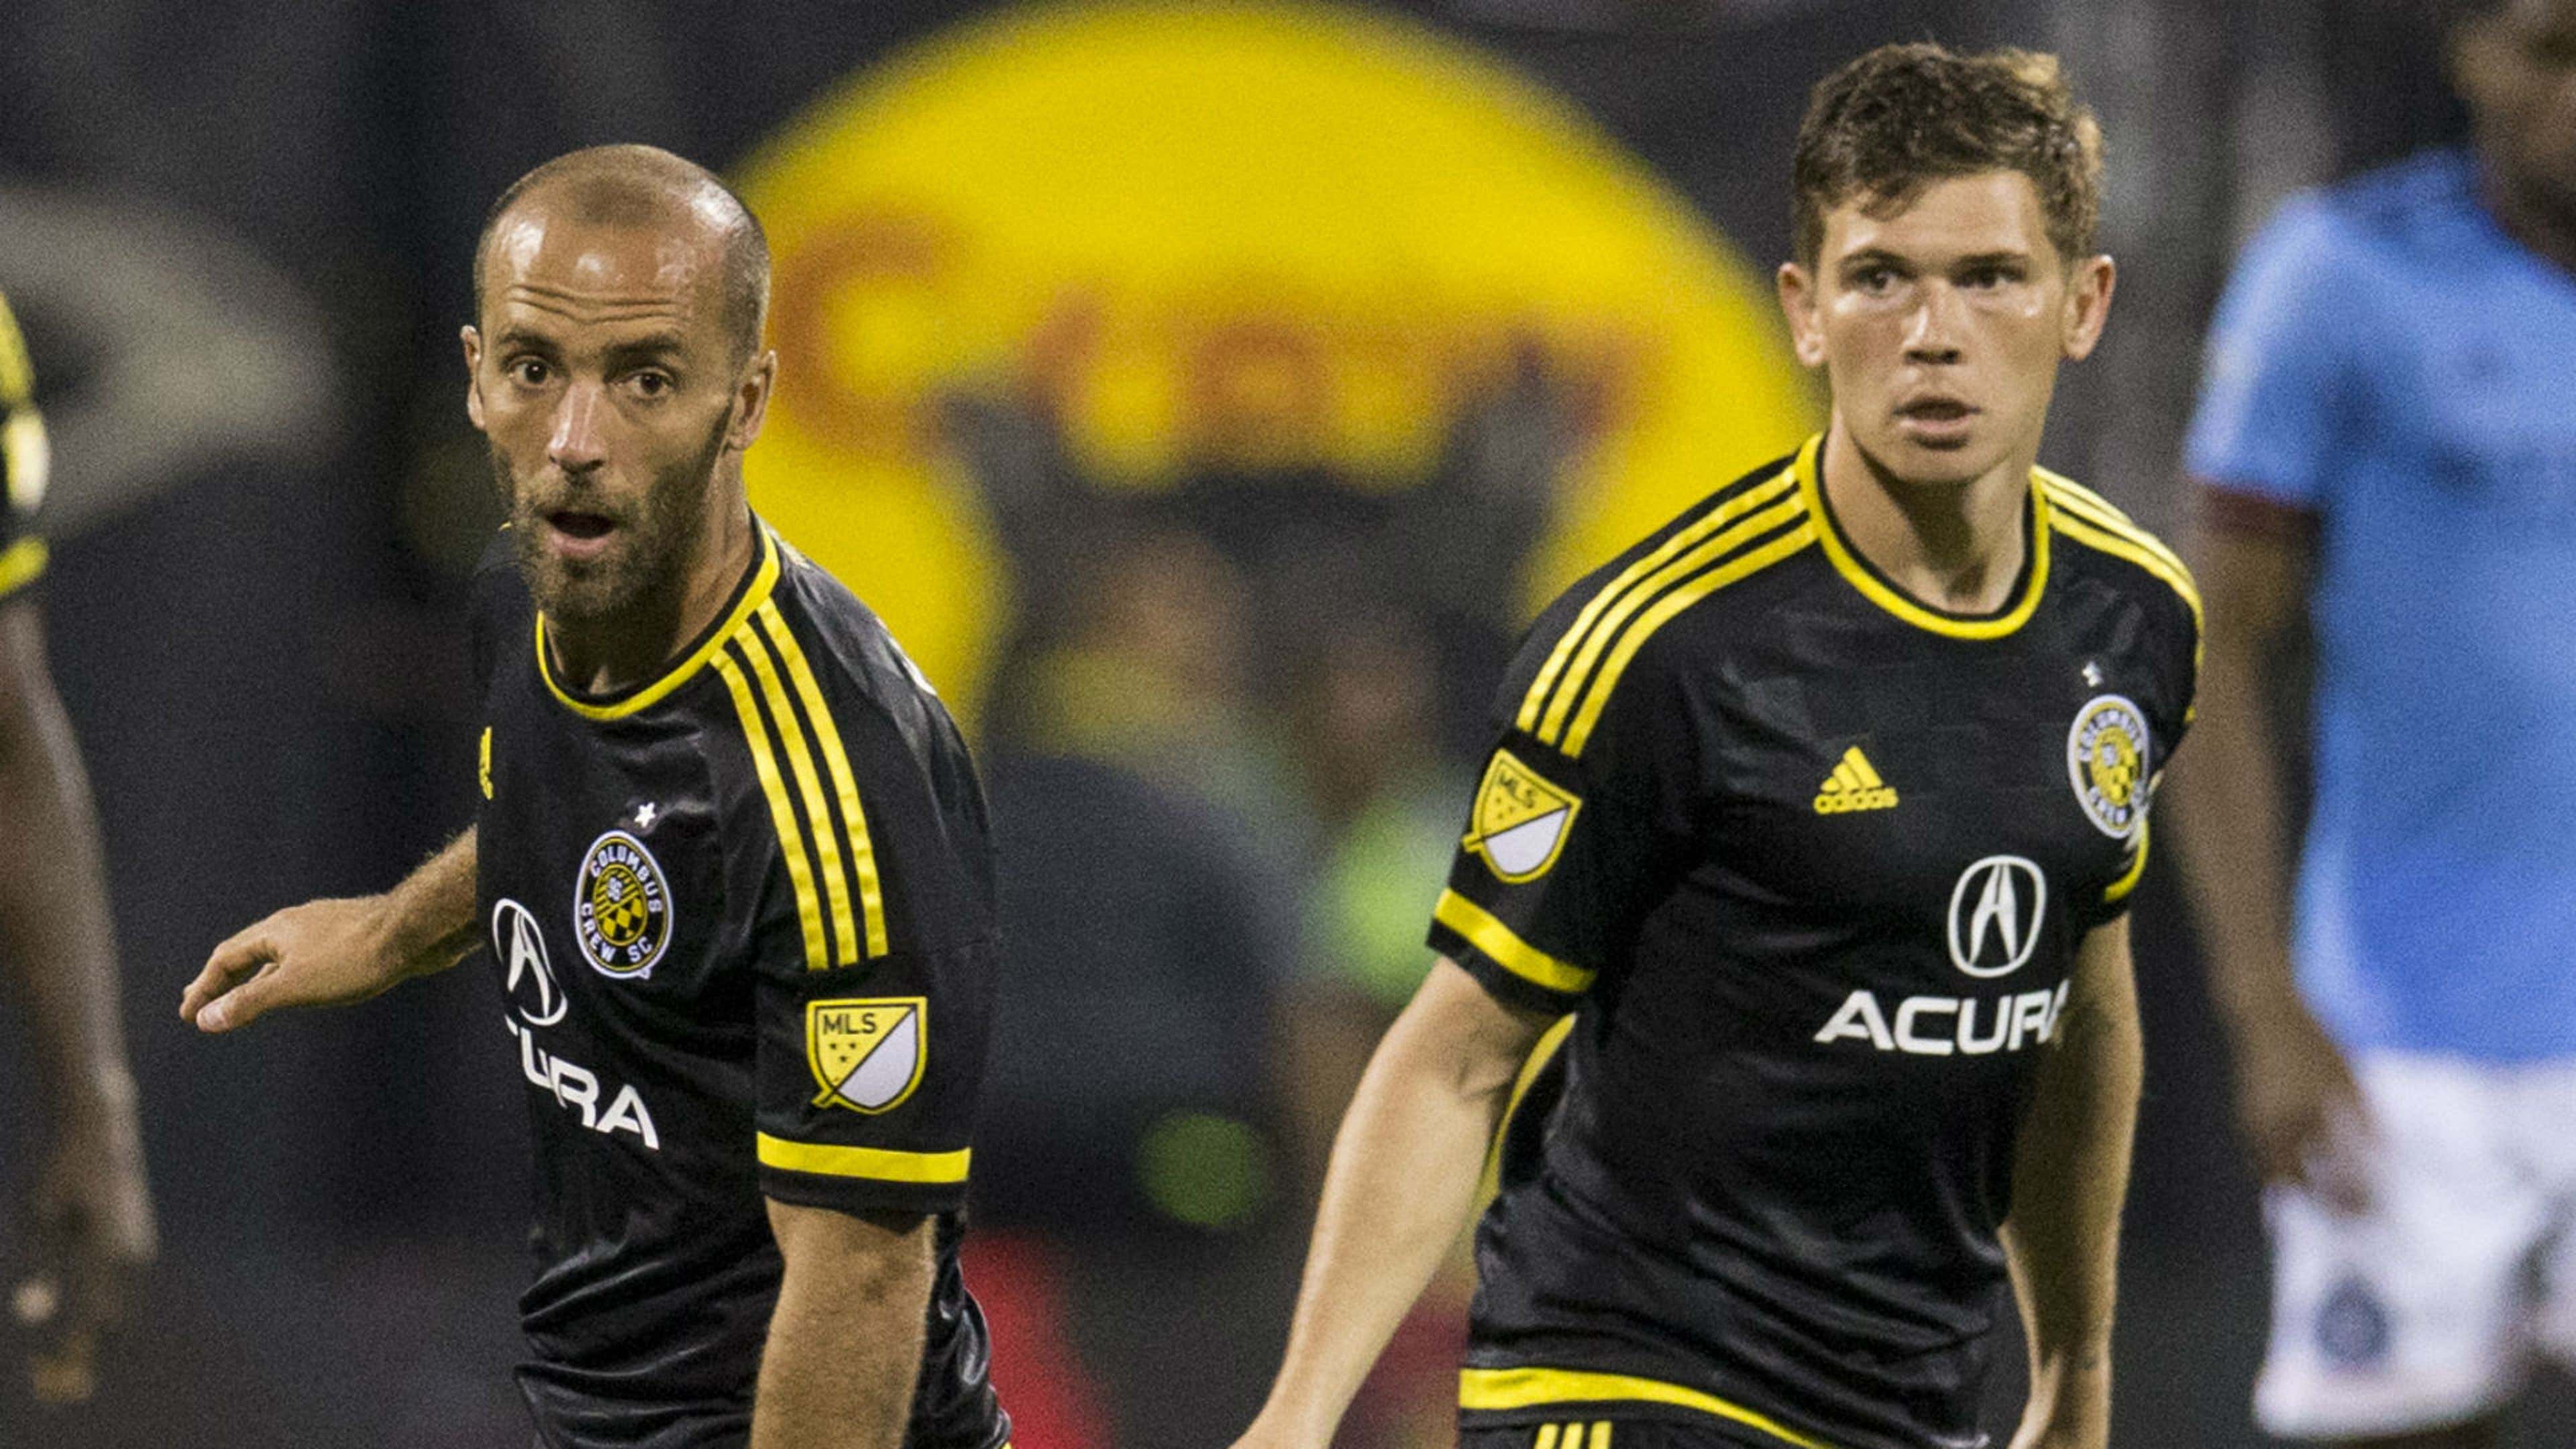 Columbus Crew 2018 season preview: Roster, projected lineup, schedule,  national TV and more